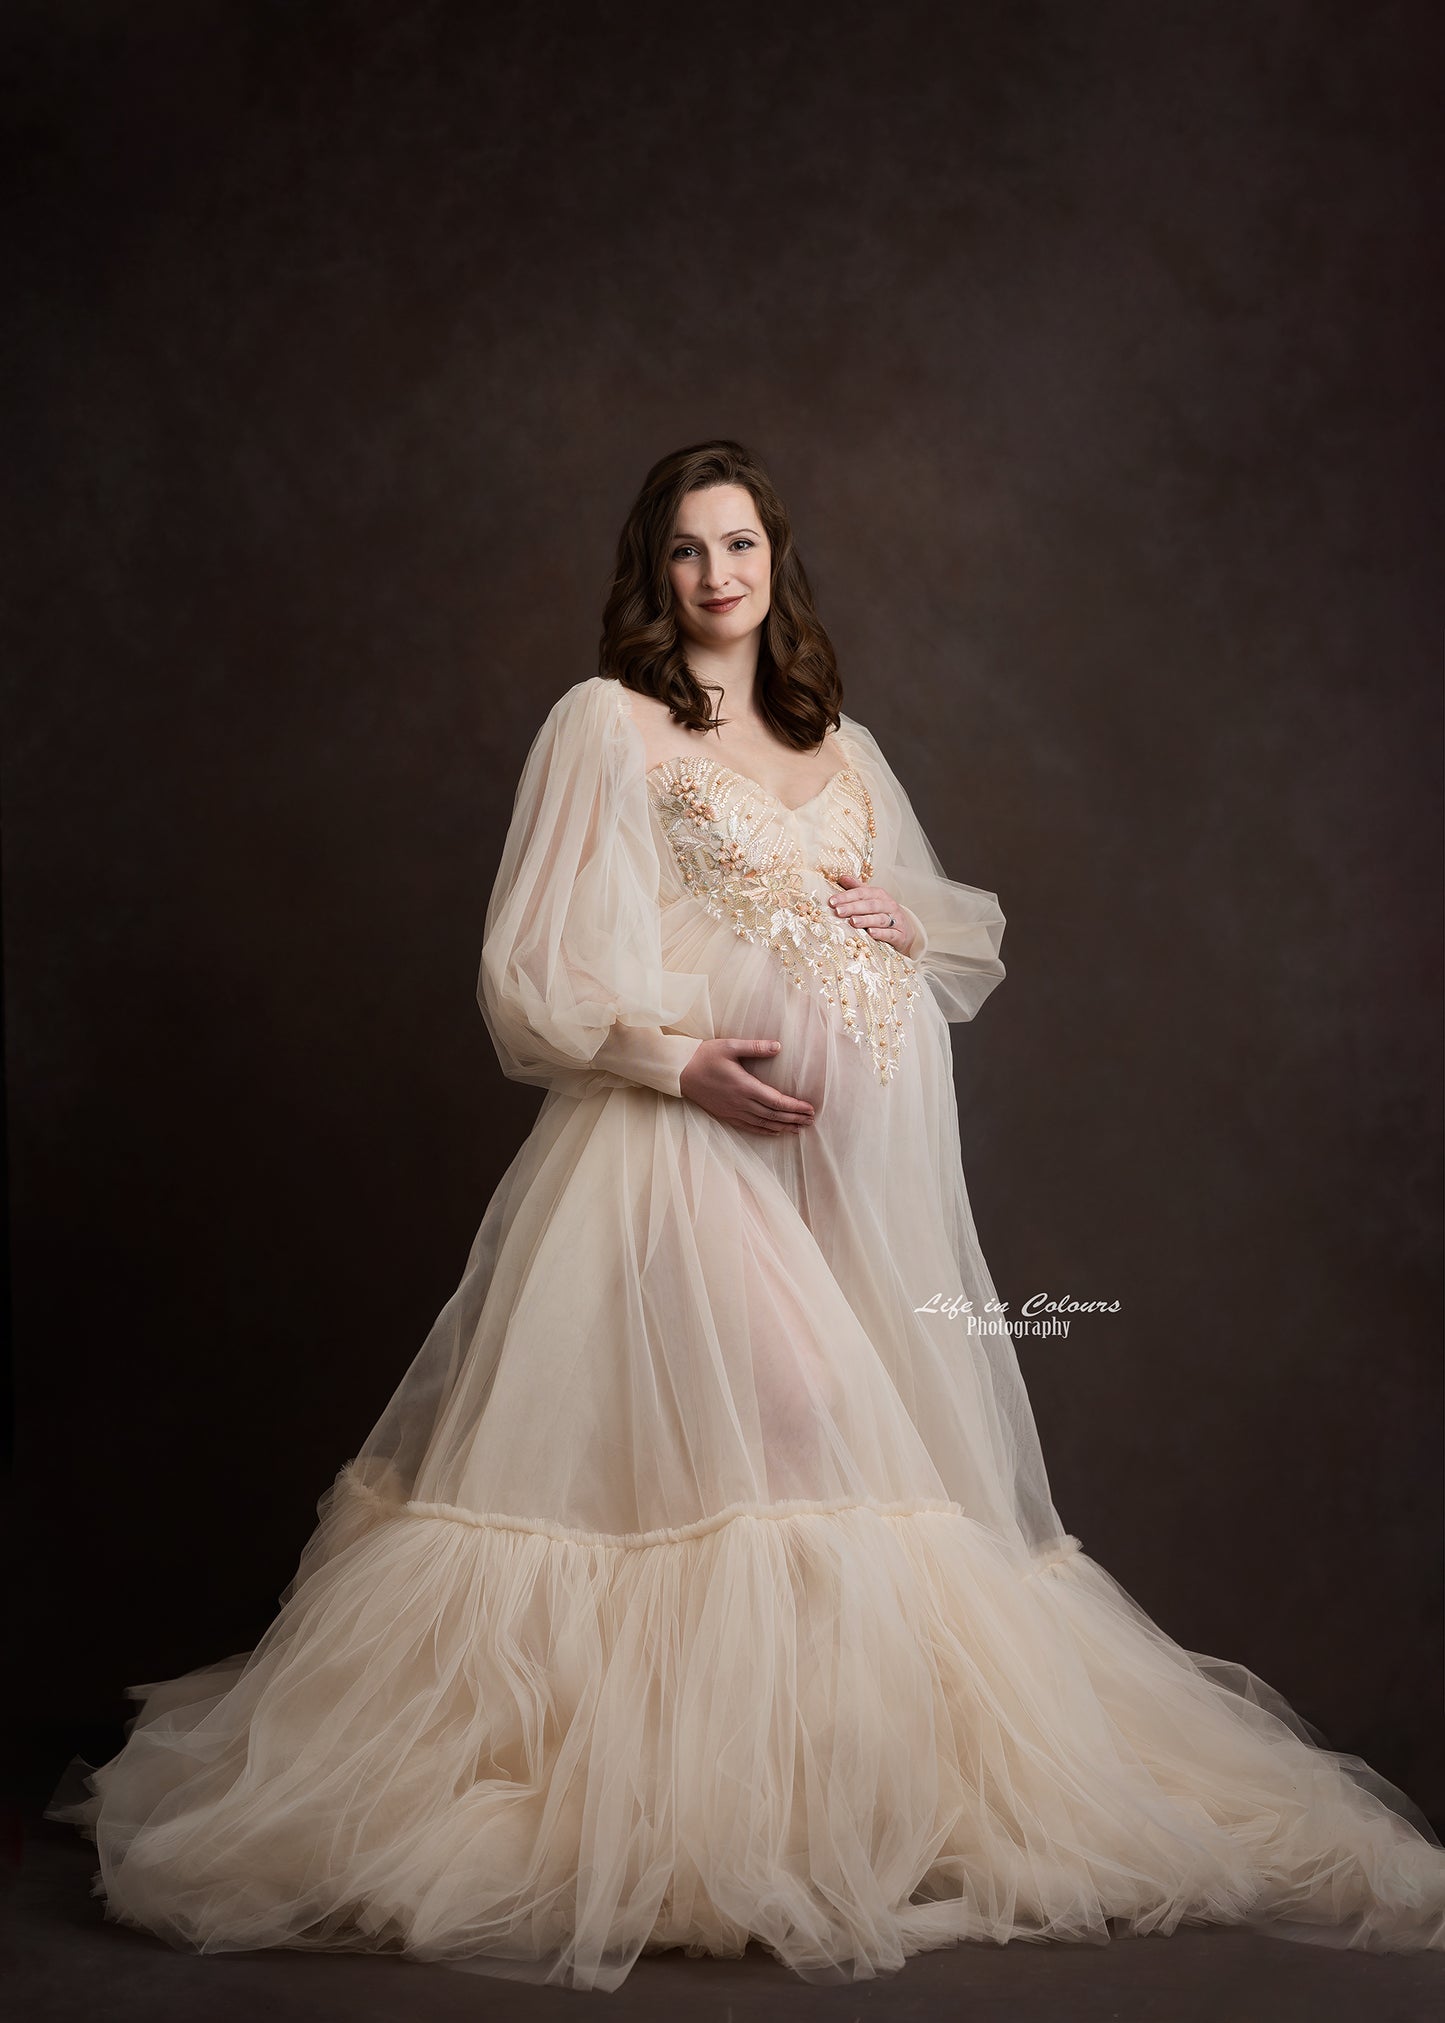 FOR HIRE / RENT tulle Maternity Photoshoot Event Dress " Daisy" in Cream